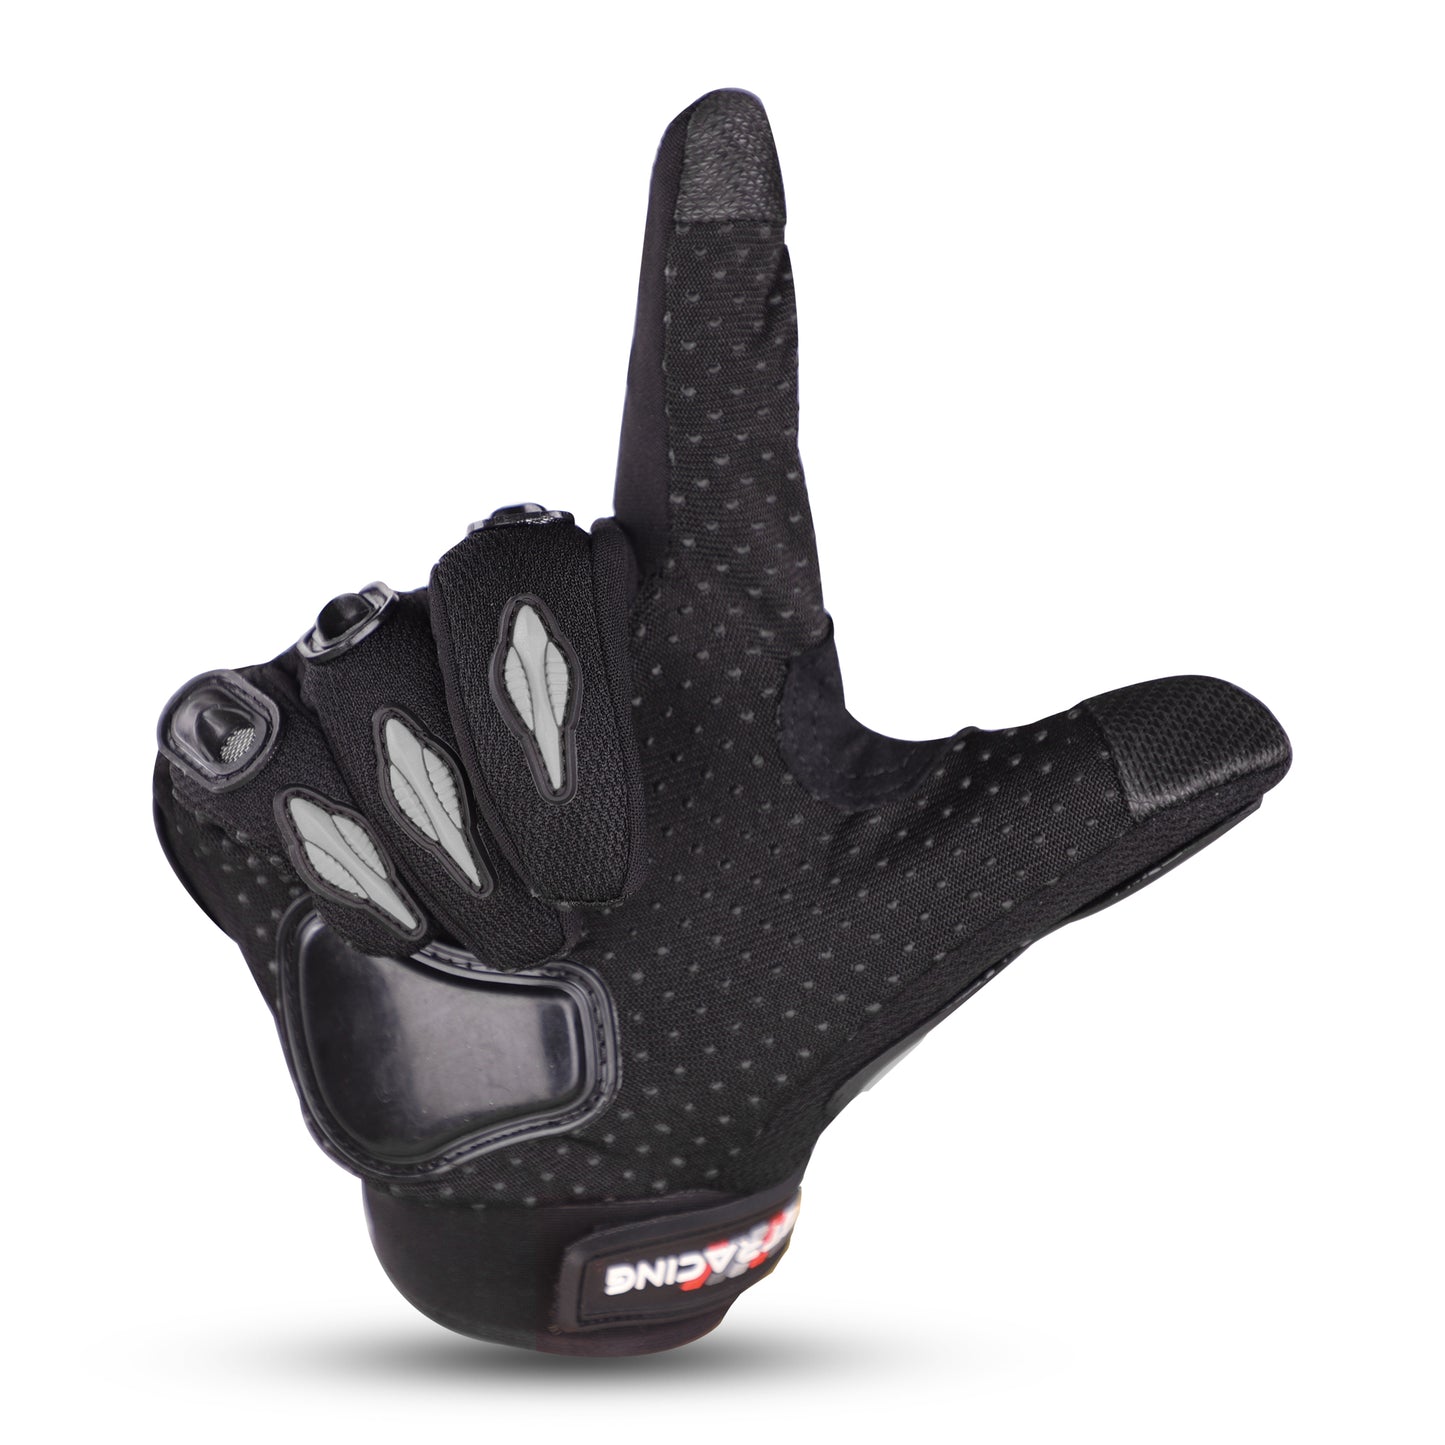 Steelbird GT-01 Full Finger Bike Riding Gloves with Touch Screen Sensitivity at Thumb and Index Finger, Protective Off-Road Motorbike Racing (Black)